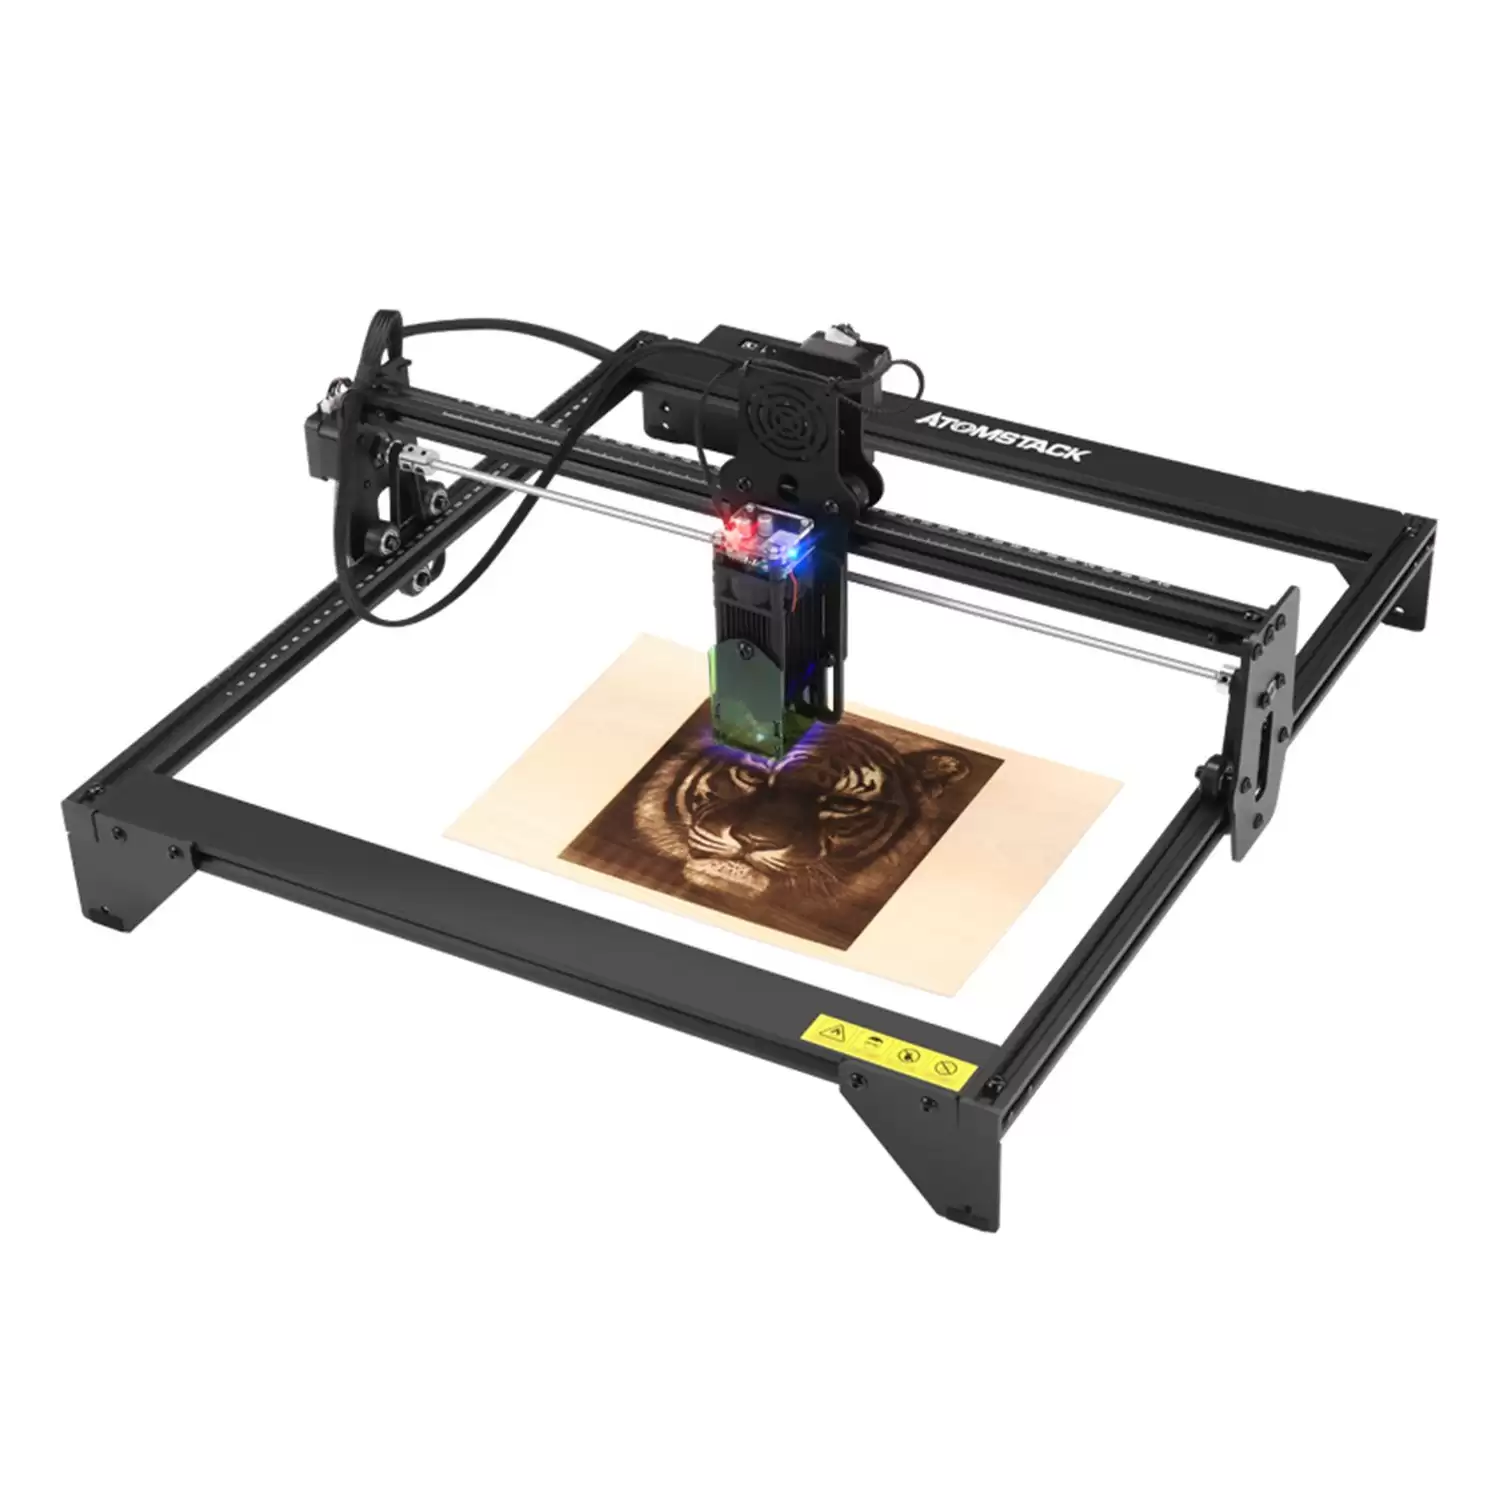 Get Extra 56% Discount On Atomstack A5 20w Laser Engraver With This Discount Coupon At Tomtop